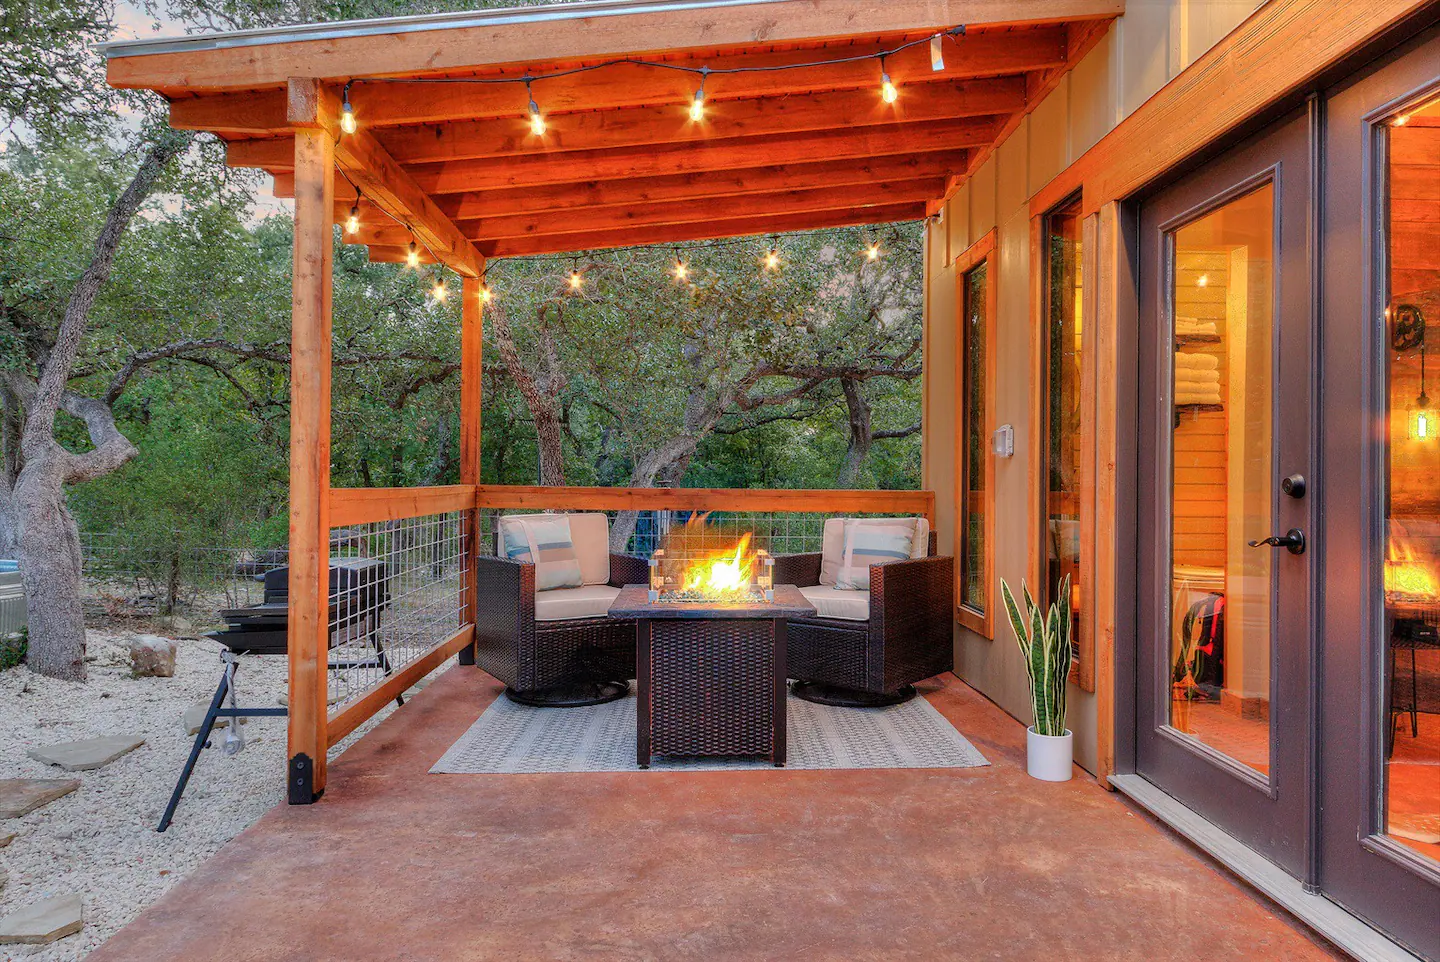 Enjoy a Texas evening on the porch with the fire table and twinkling lights.